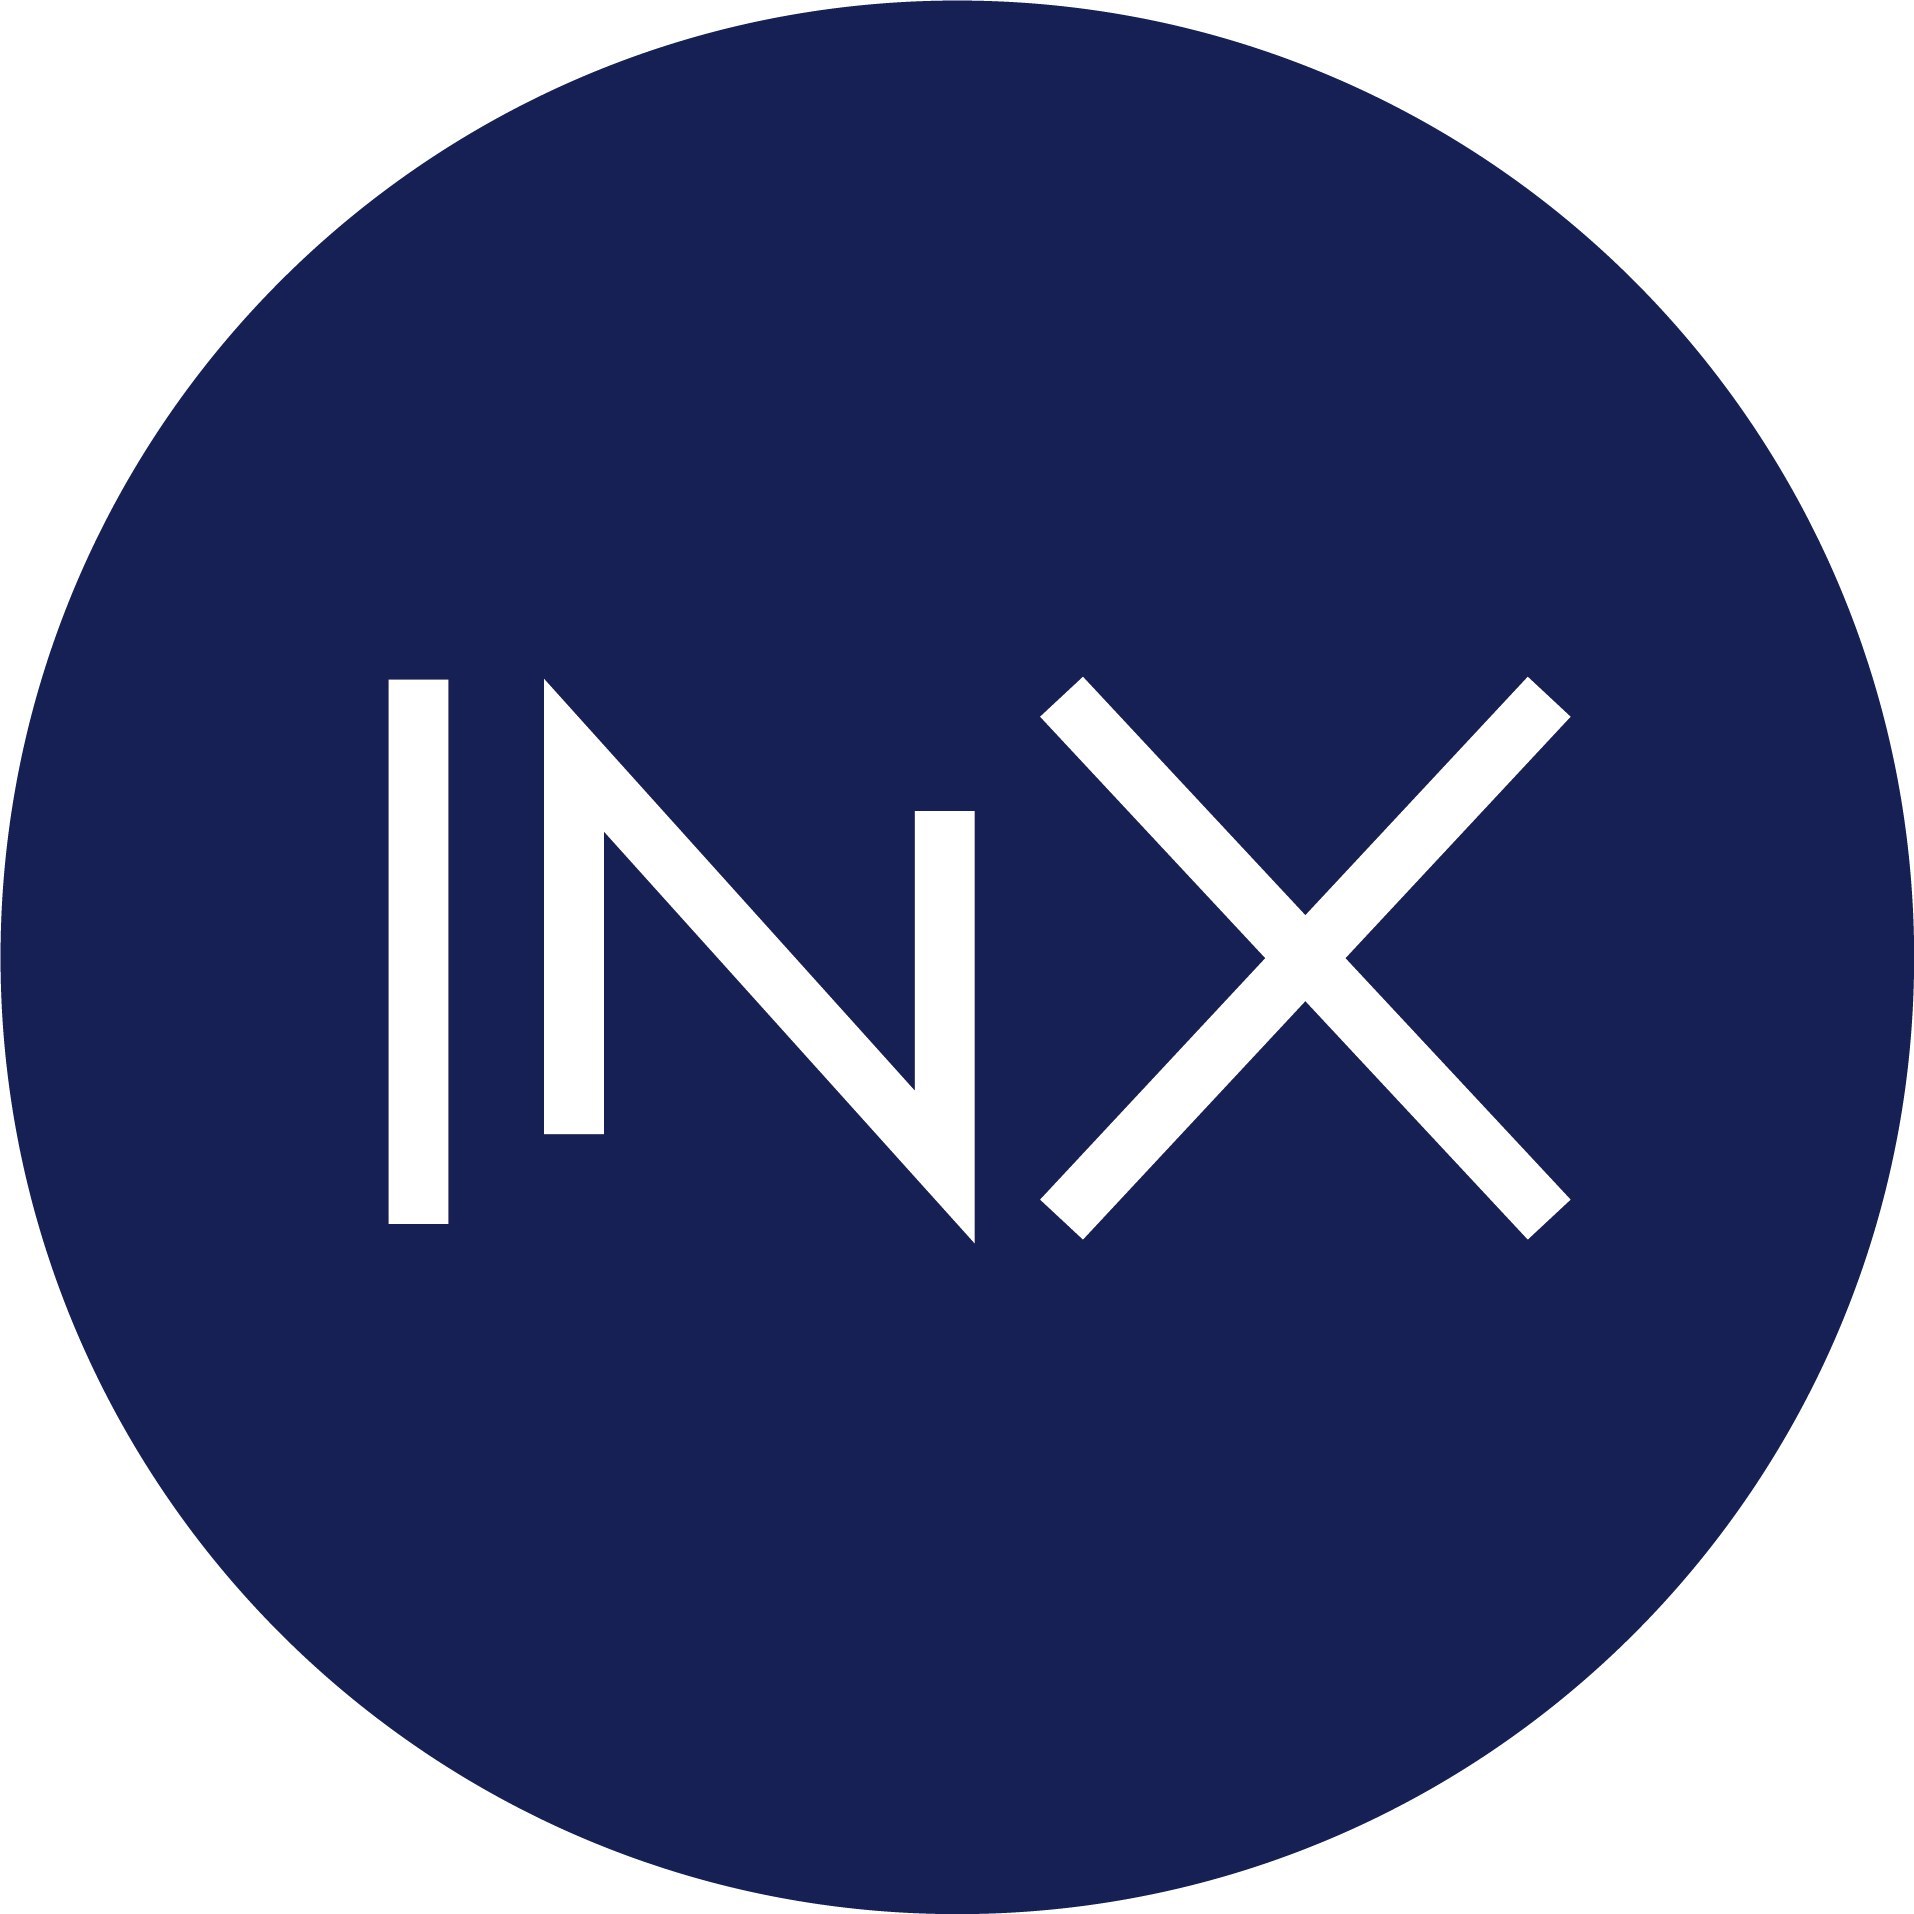 INX Agrees to Extend Negotiating Period for Potential Acquisition Deal with Republic